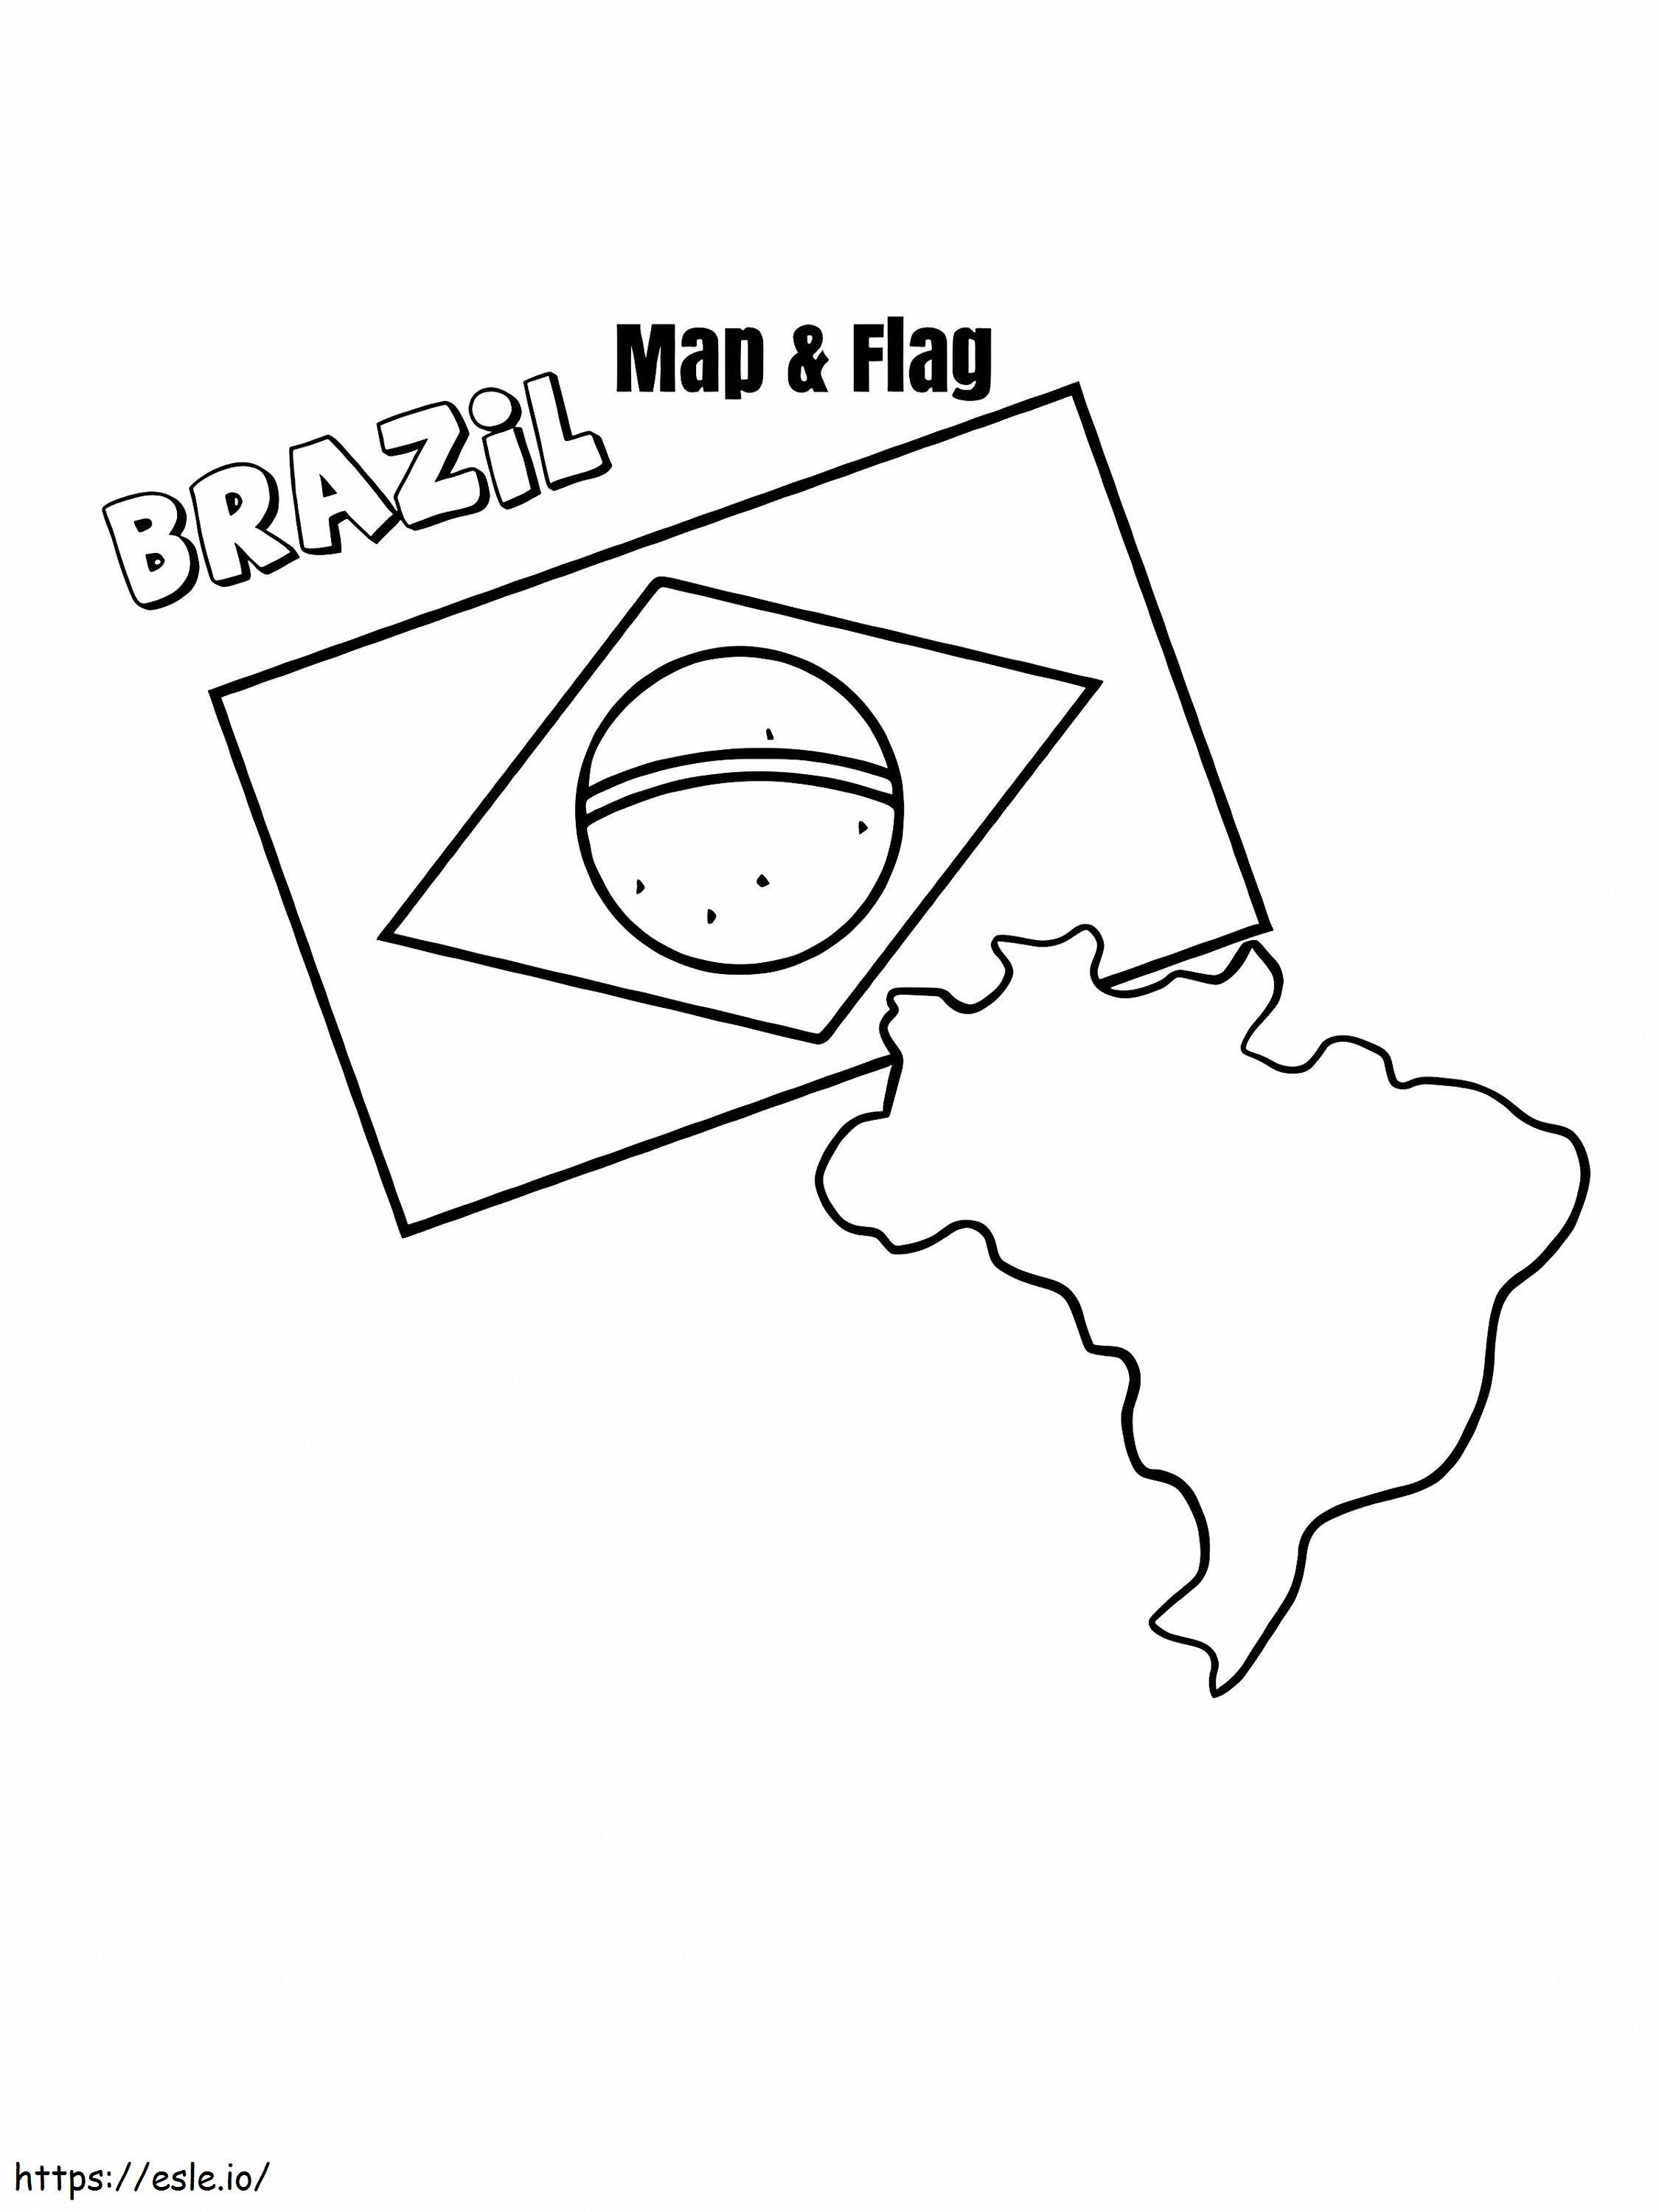 Brazil Map And Flag coloring page